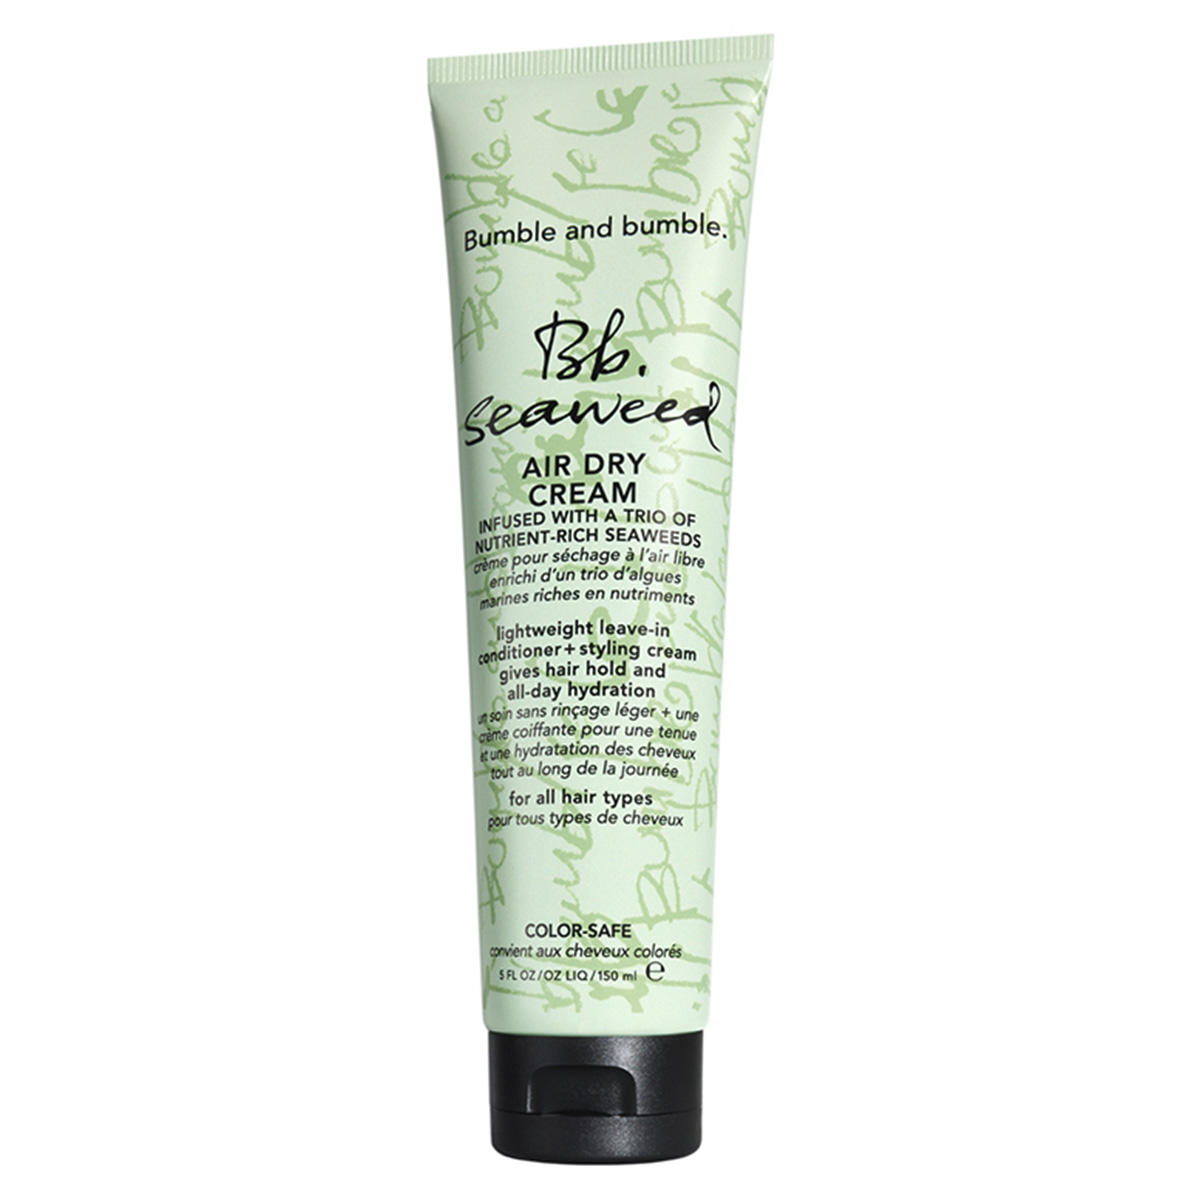 Bumble and bumble Bb. Seaweed Air Dry Cream  - 1